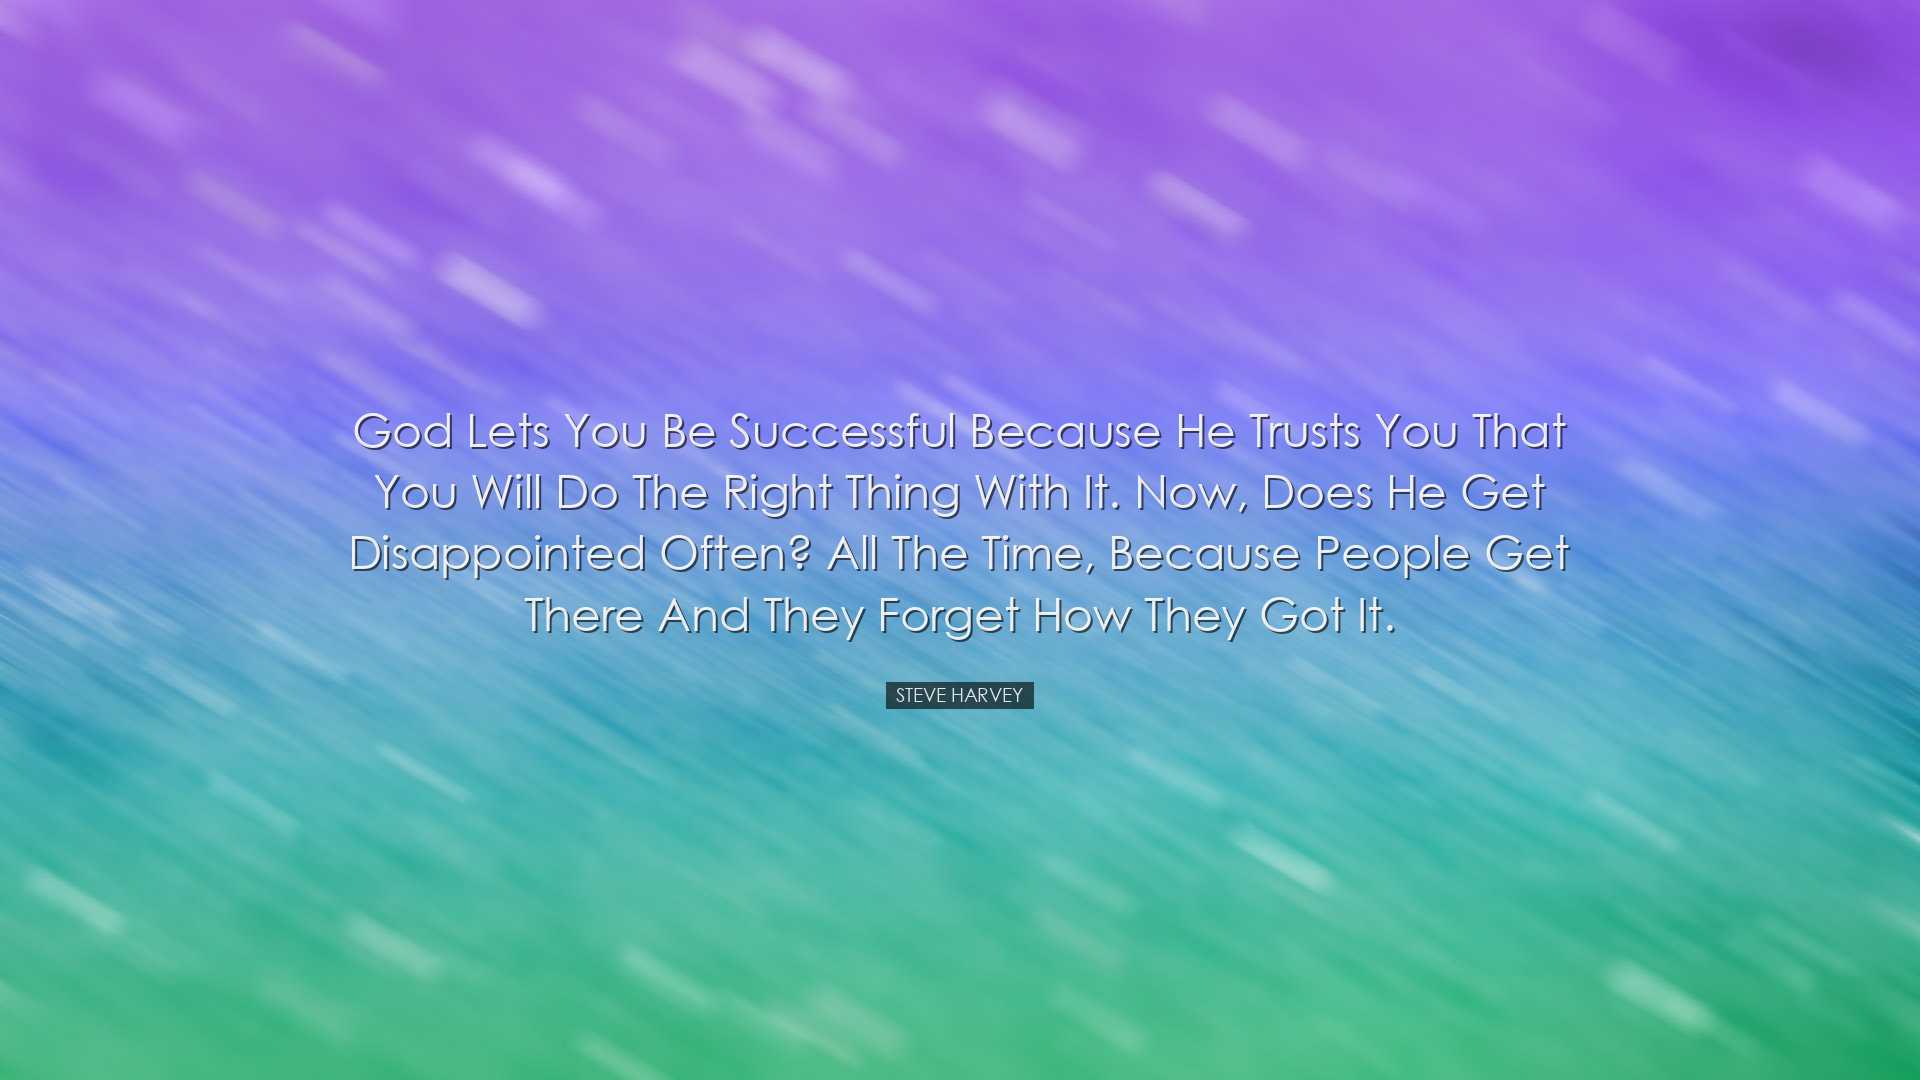 God lets you be successful because he trusts you that you will do